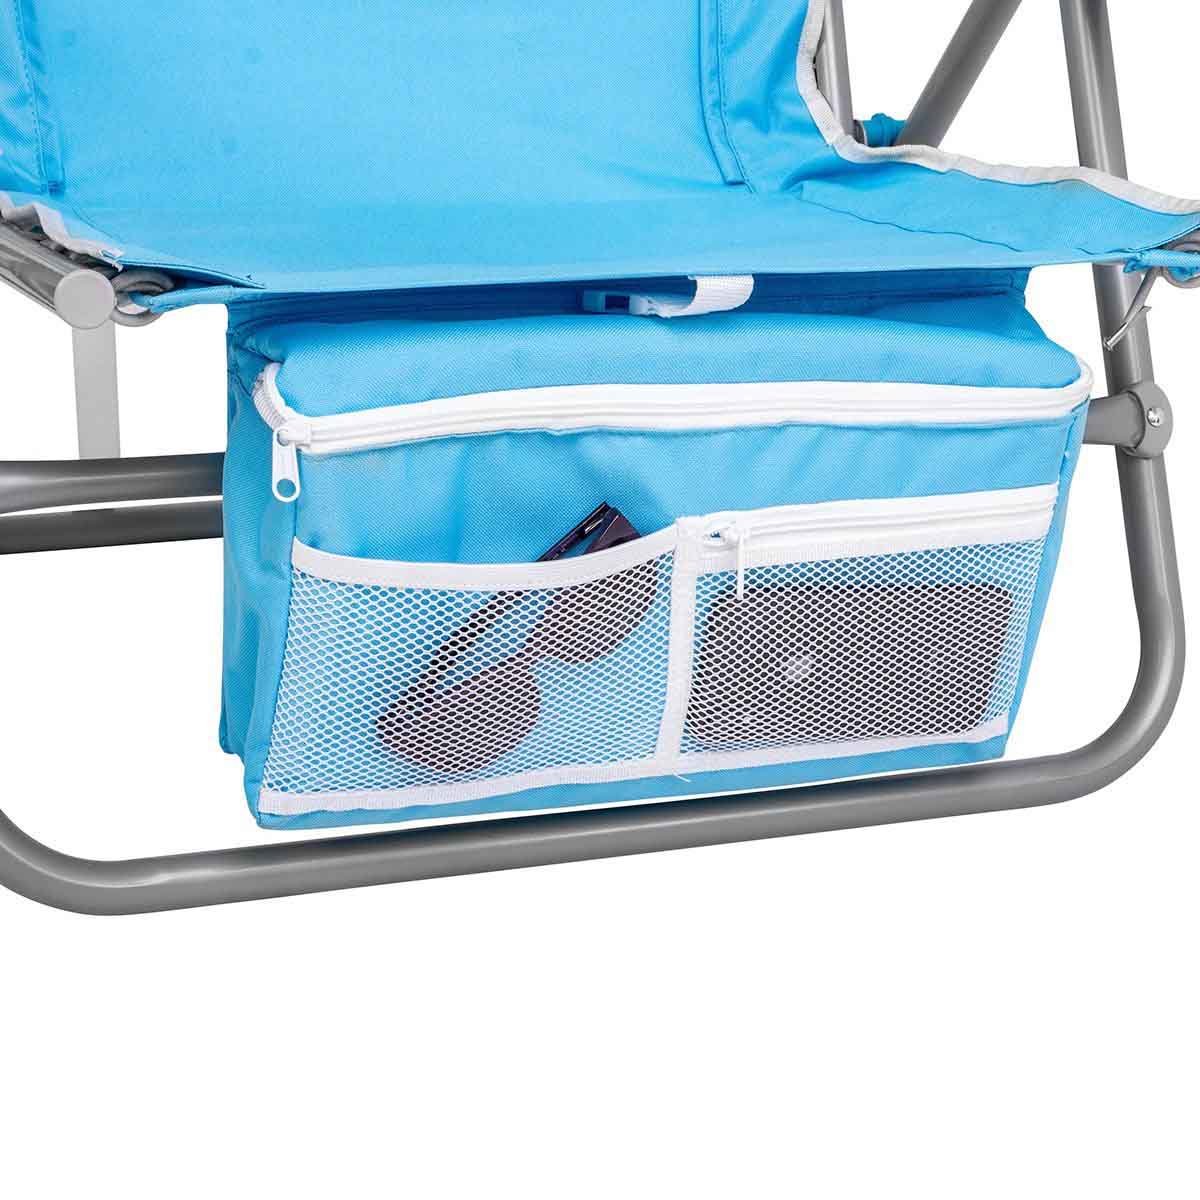 Premium Backpack Beach Chair's Cooler Bag is equipped with two pockets to store your belongings